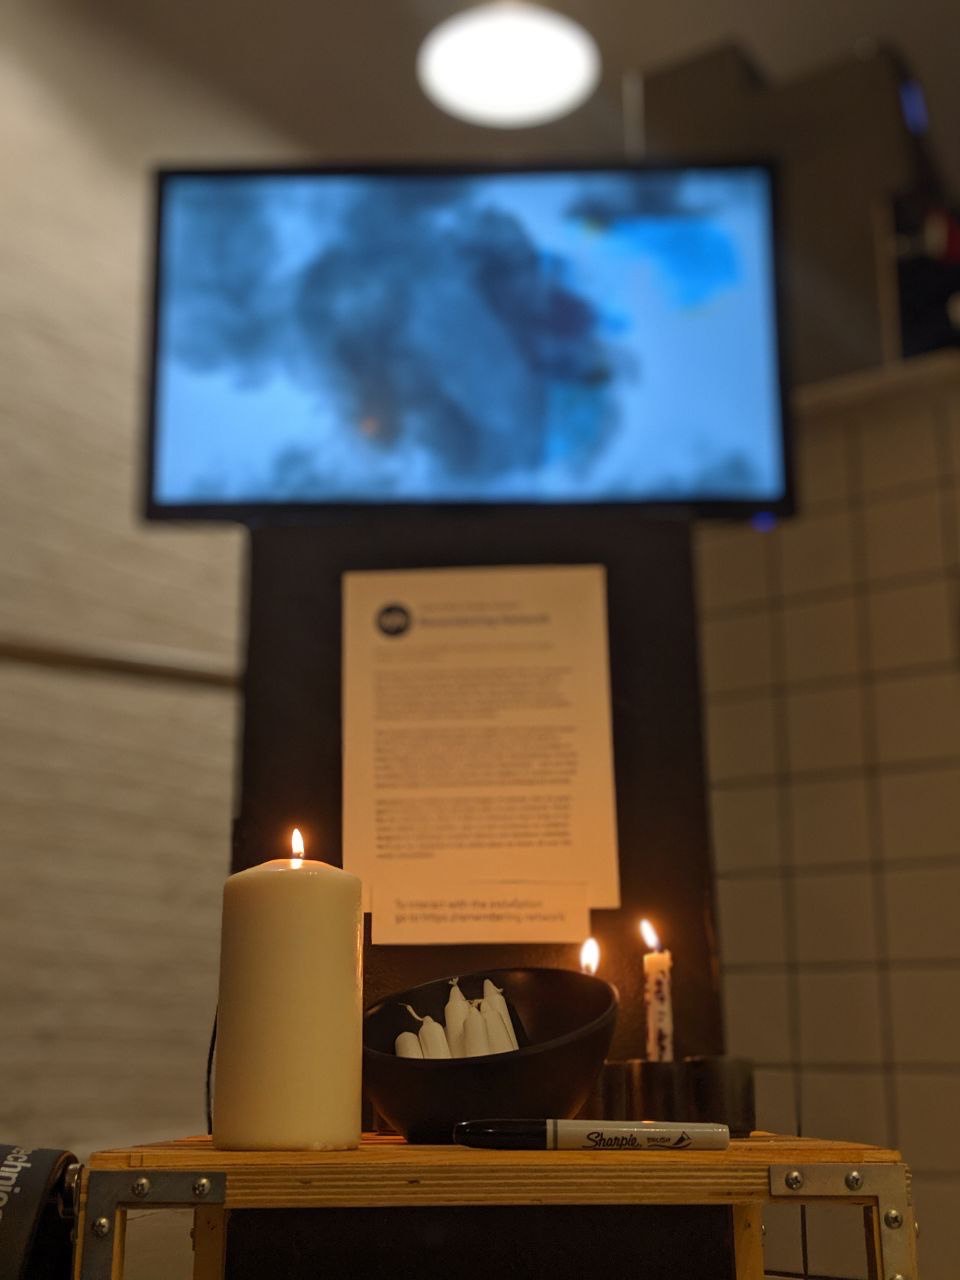 Remembering Network by artist Sarah Friend installed at Radical Networks with candle-lit shrine in front of digital display